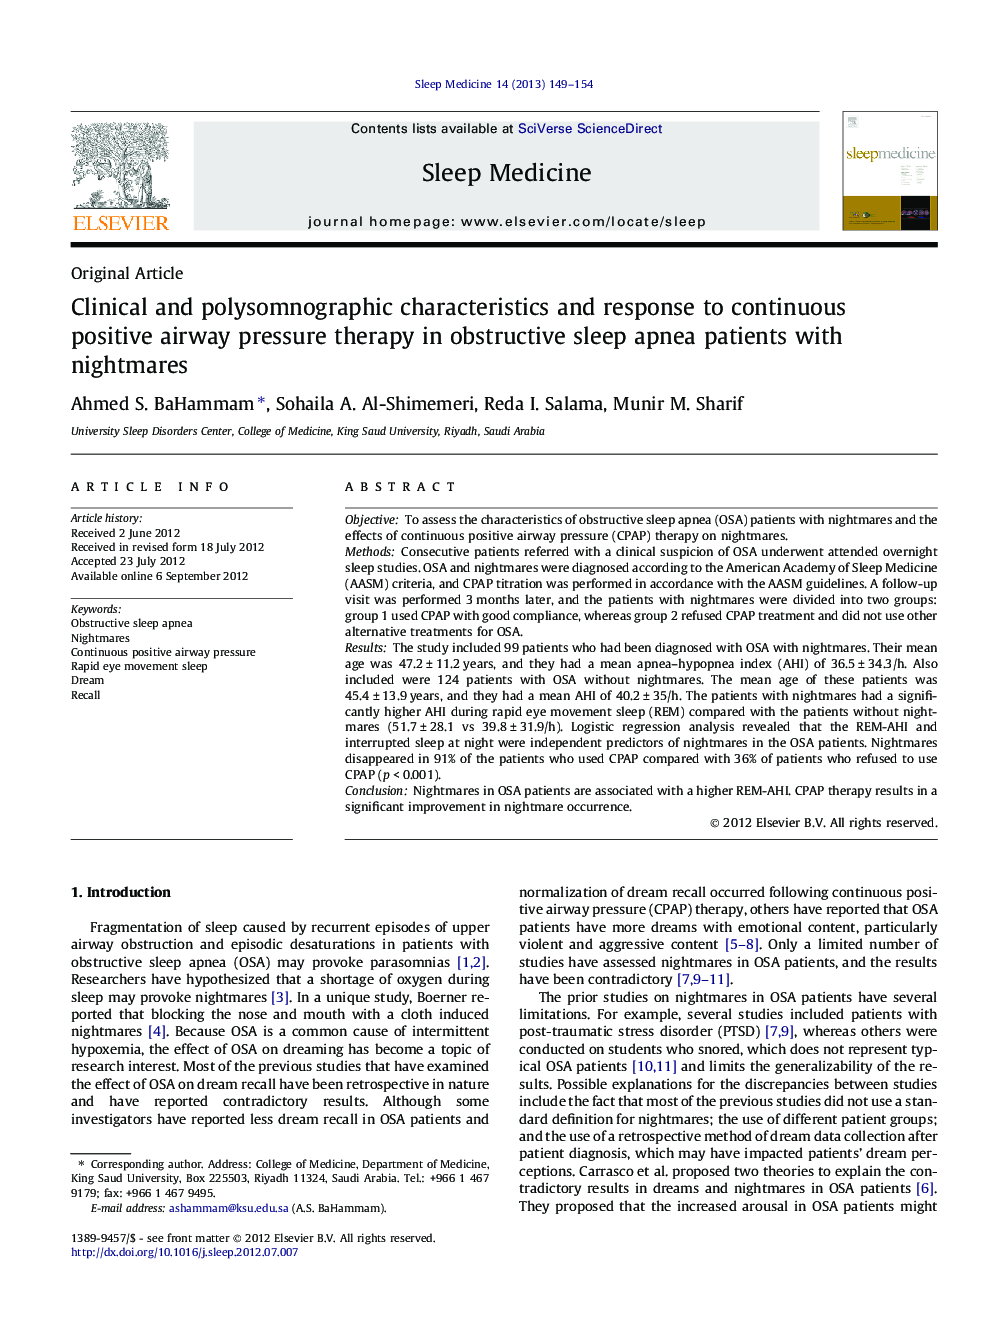 Clinical and polysomnographic characteristics and response to continuous positive airway pressure therapy in obstructive sleep apnea patients with nightmares